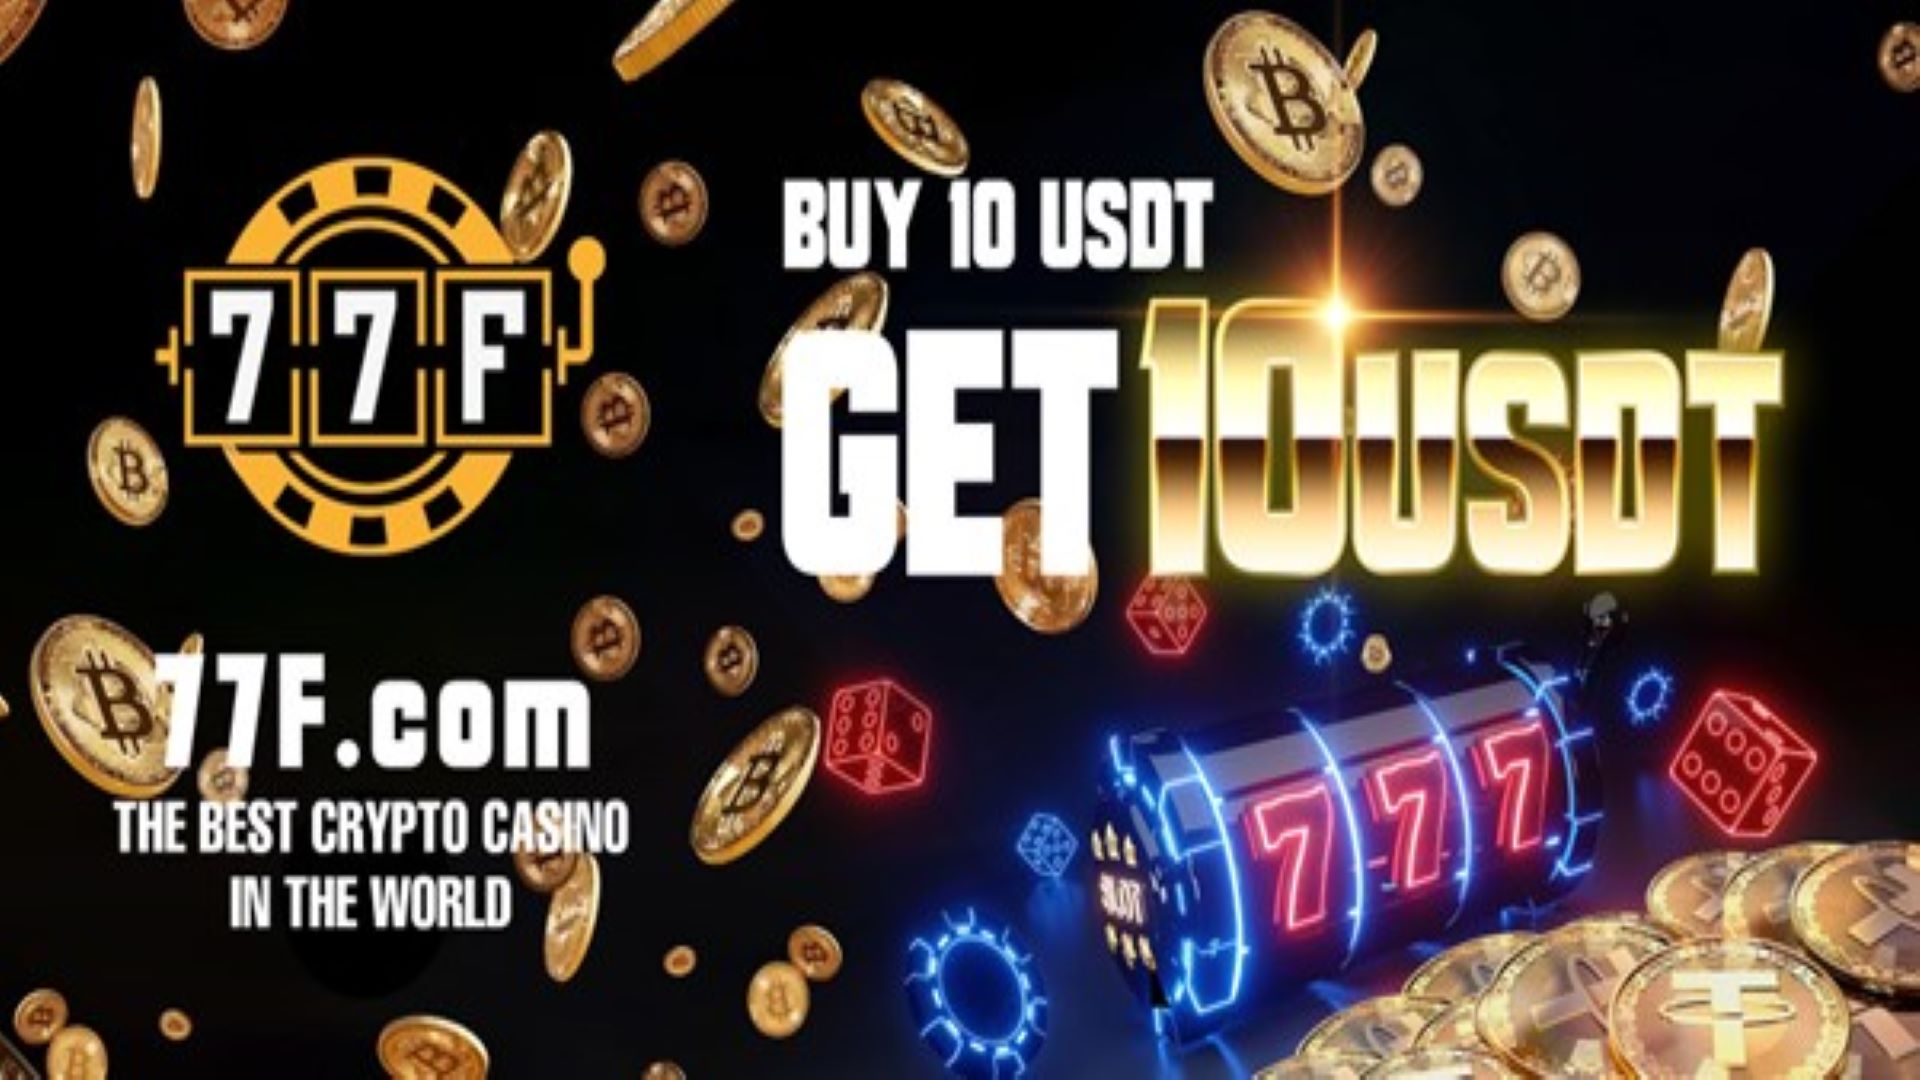 77F brand New Crypto Casino With The Highest Rebate Ever The Coin 